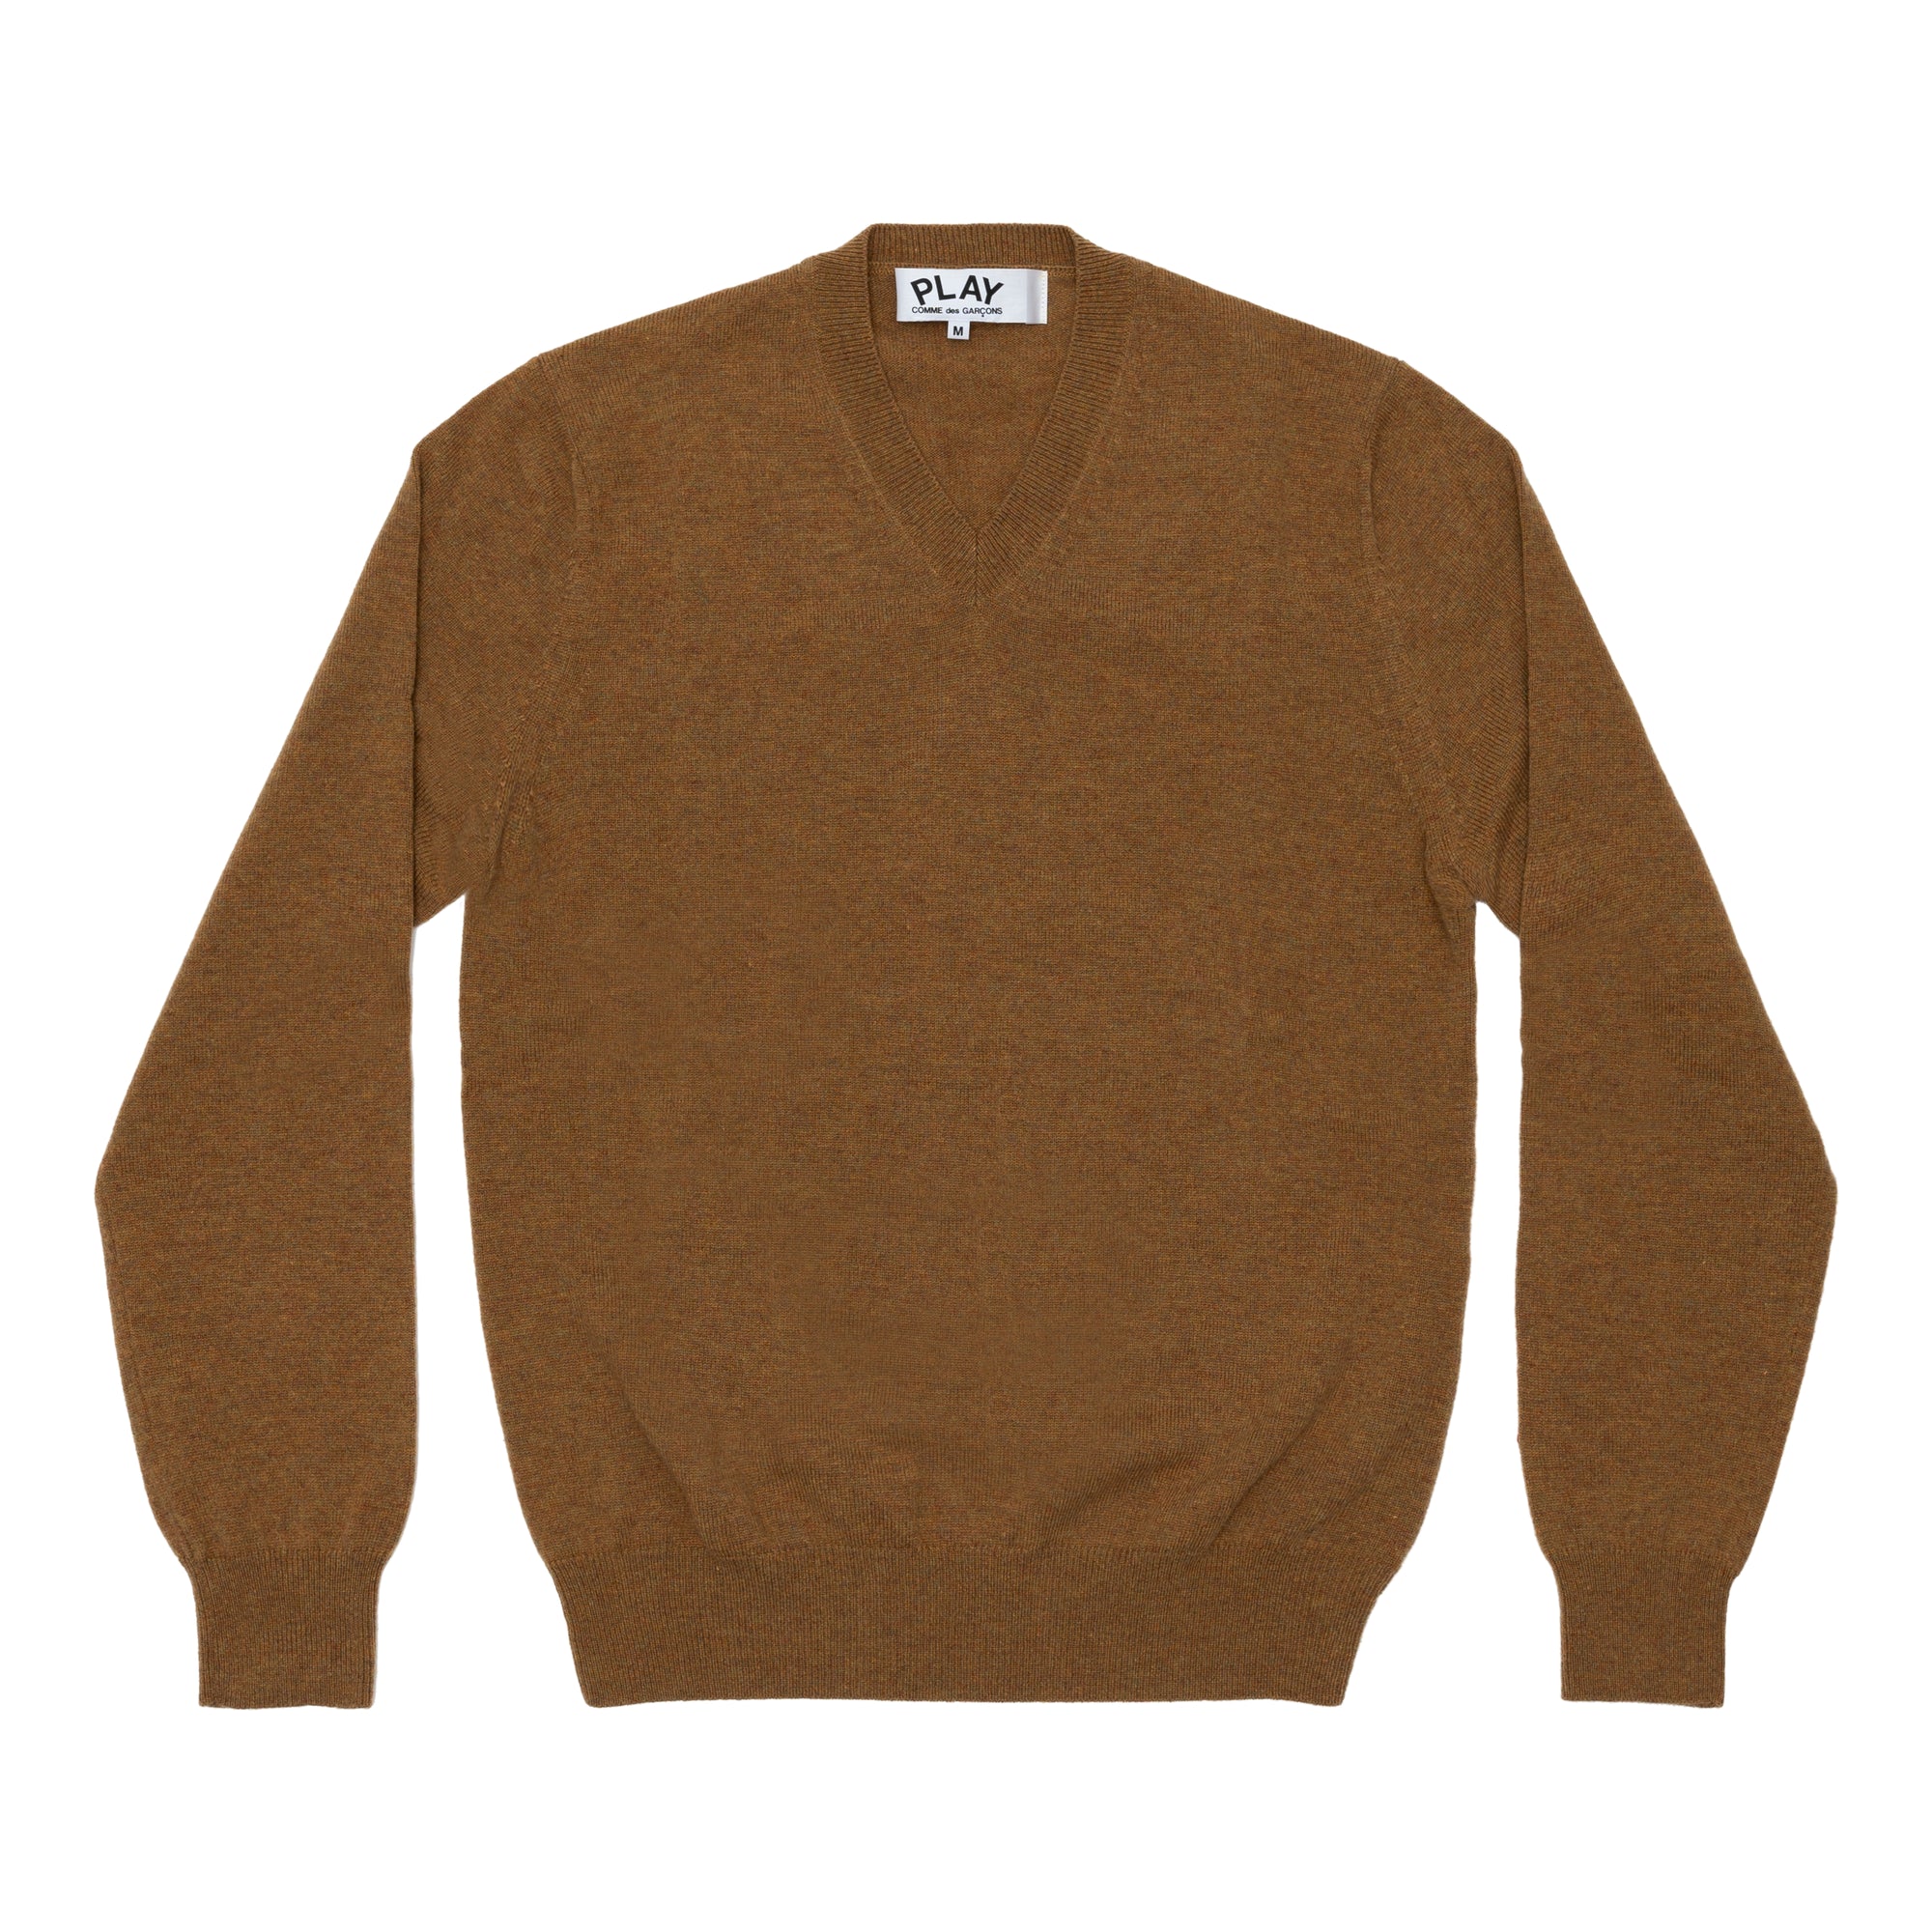 Play - Men’s Lambswool V Neck Sweater - (Brown) view 1